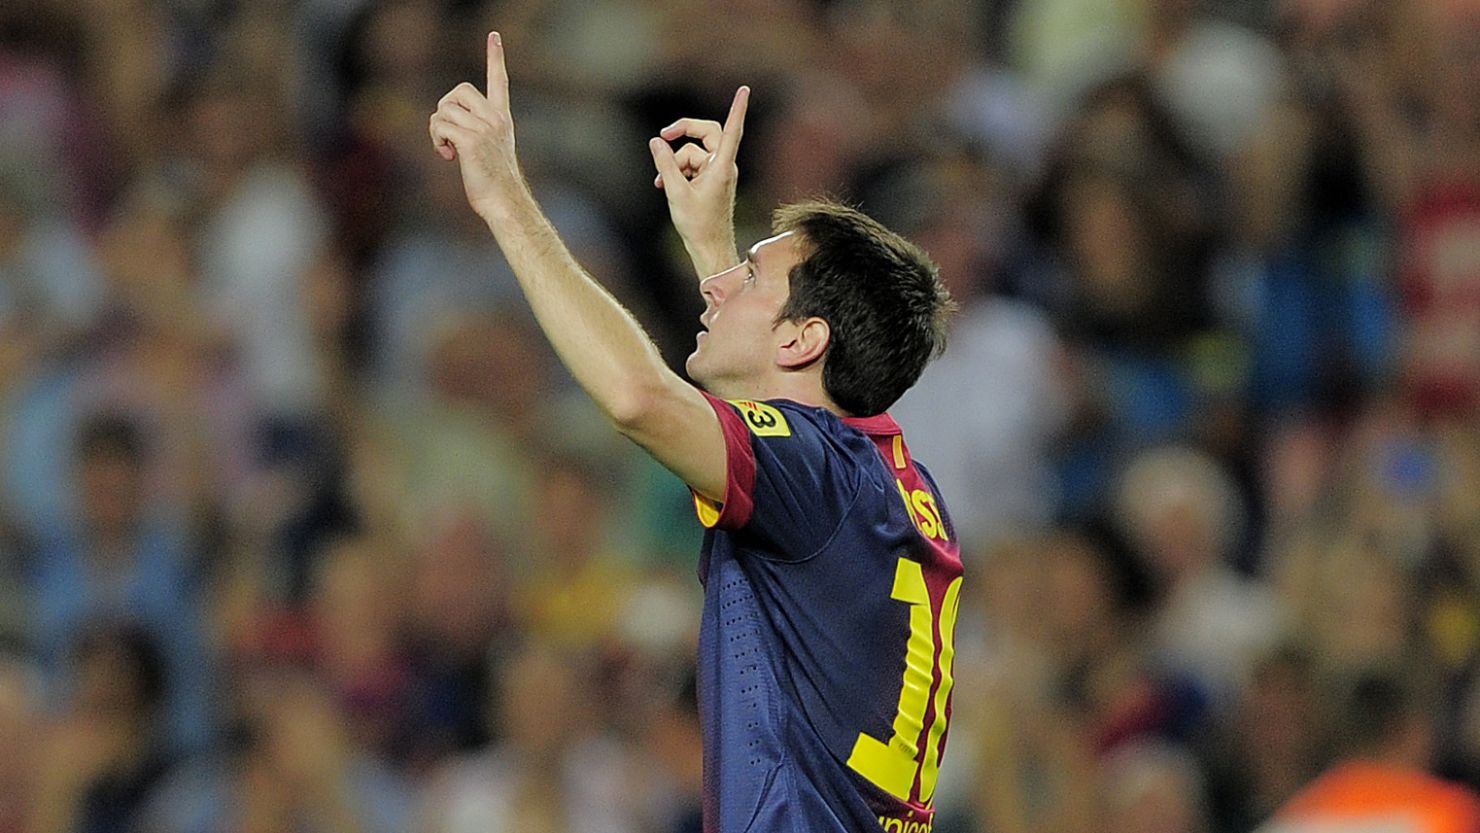 Lionel Messi scored two first-half goals as Barcelona beat Real Sociedad 5-1 on Sunday.